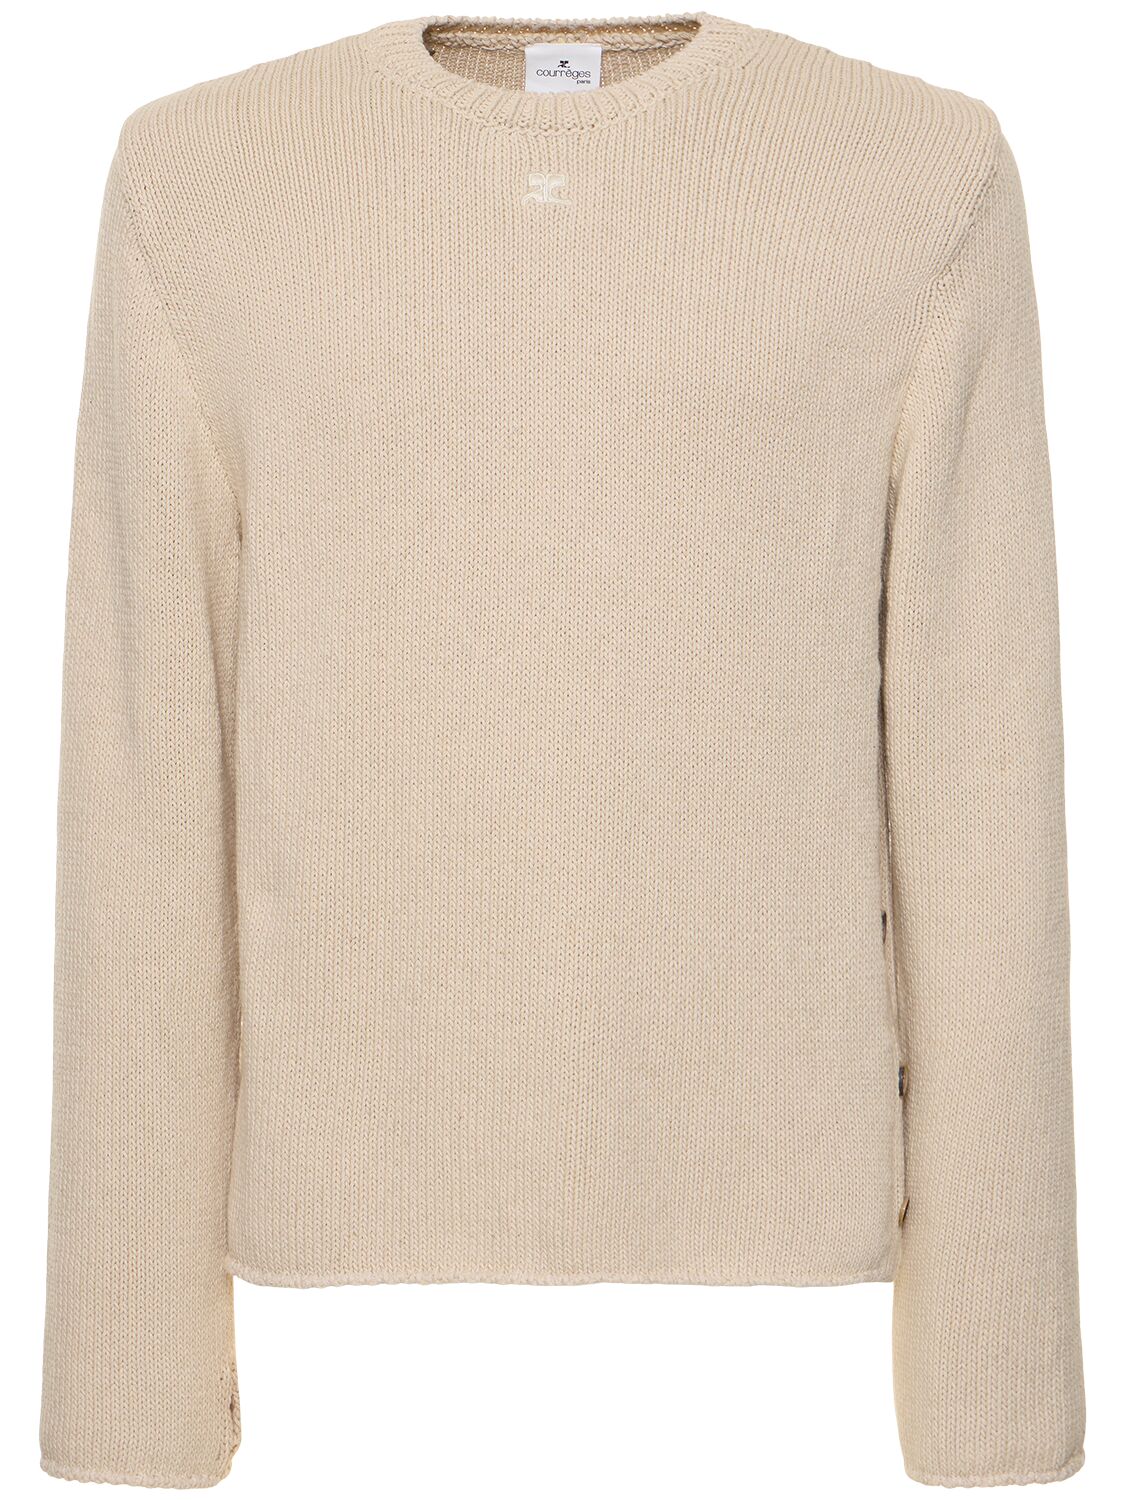 Courrèges Open Side Cotton & Linen Knit Sweater In 베이지